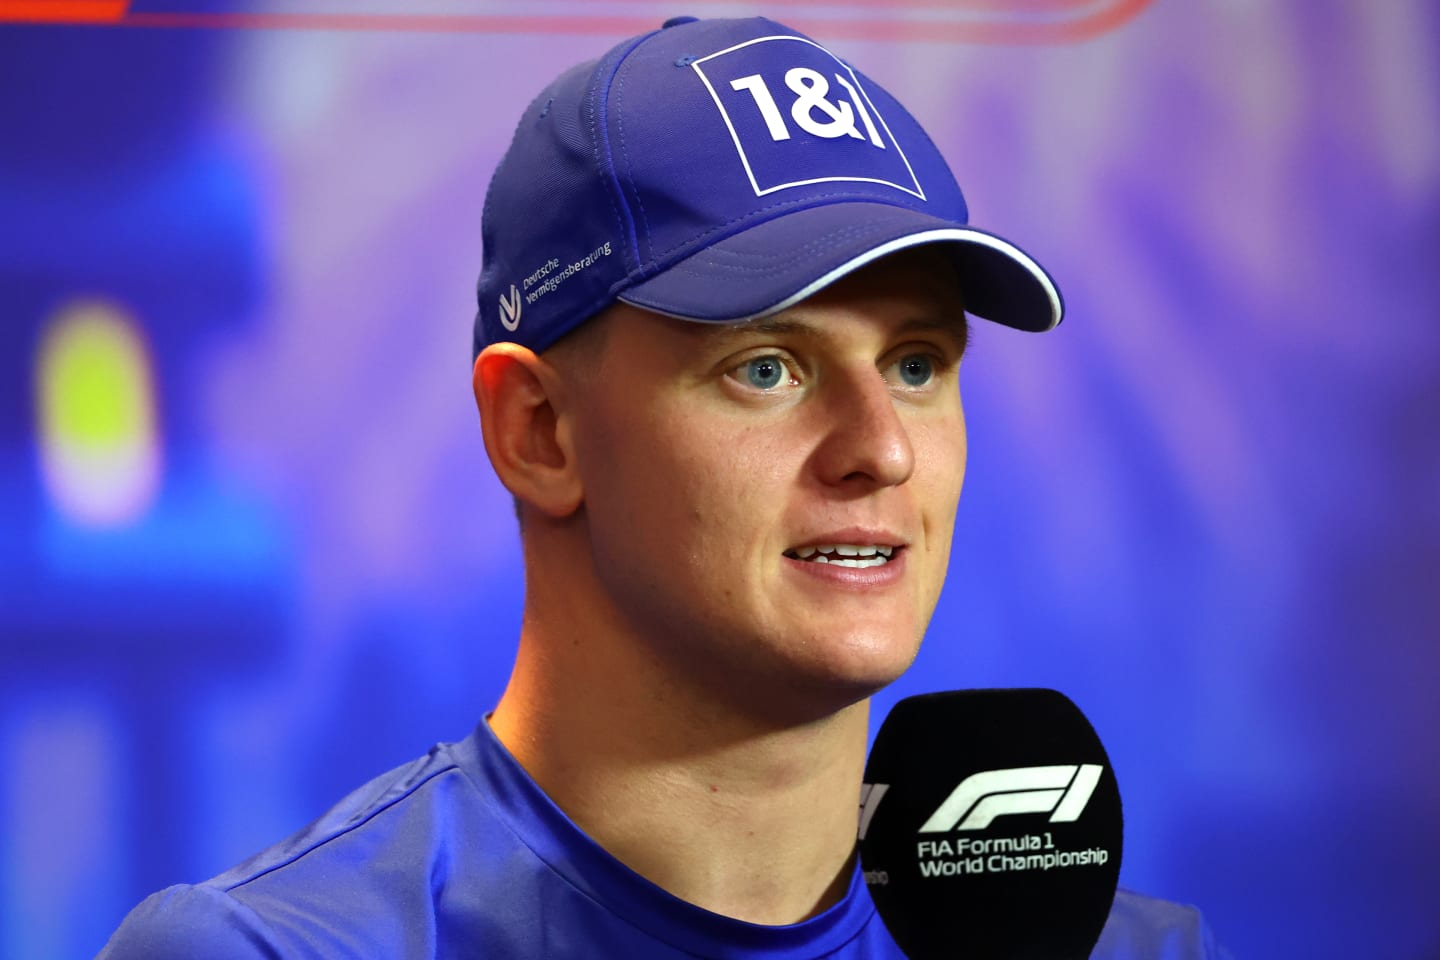 ABU DHABI, UNITED ARAB EMIRATES - NOVEMBER 17: Mick Schumacher of Germany and Haas F1 talks in a press conference during previews ahead of the F1 Grand Prix of Abu Dhabi at Yas Marina Circuit on November 17, 2022 in Abu Dhabi, United Arab Emirates. (Photo by Bryn Lennon/Getty Images)